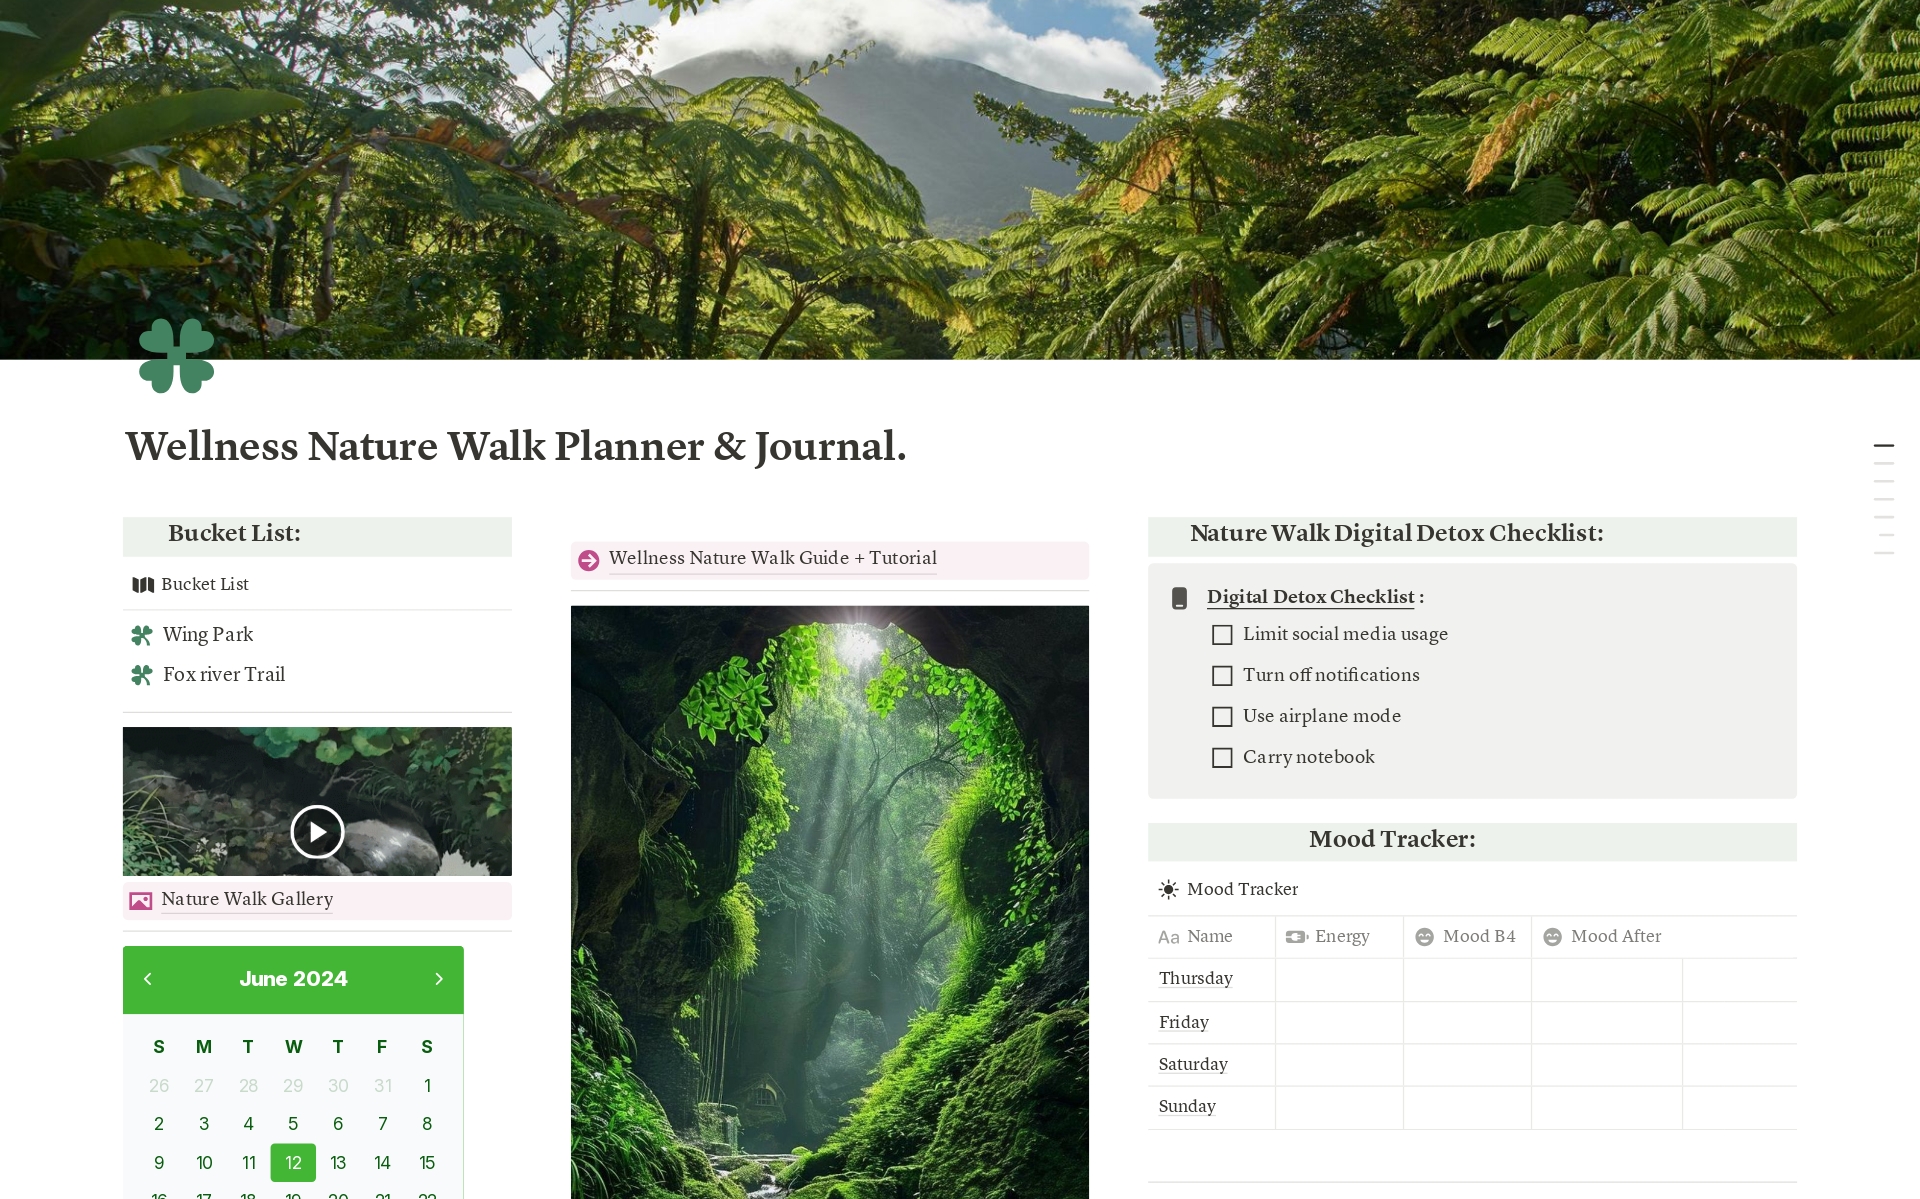 Introducing the Wellness Nature Walk Planner & Journal with the following features: Nature walk planner, nature walk Bucket list, mood tracker, nature walk gallery, nature walk checklist & inventory, nature walk notes and journal, nature walk guide, digital detox.